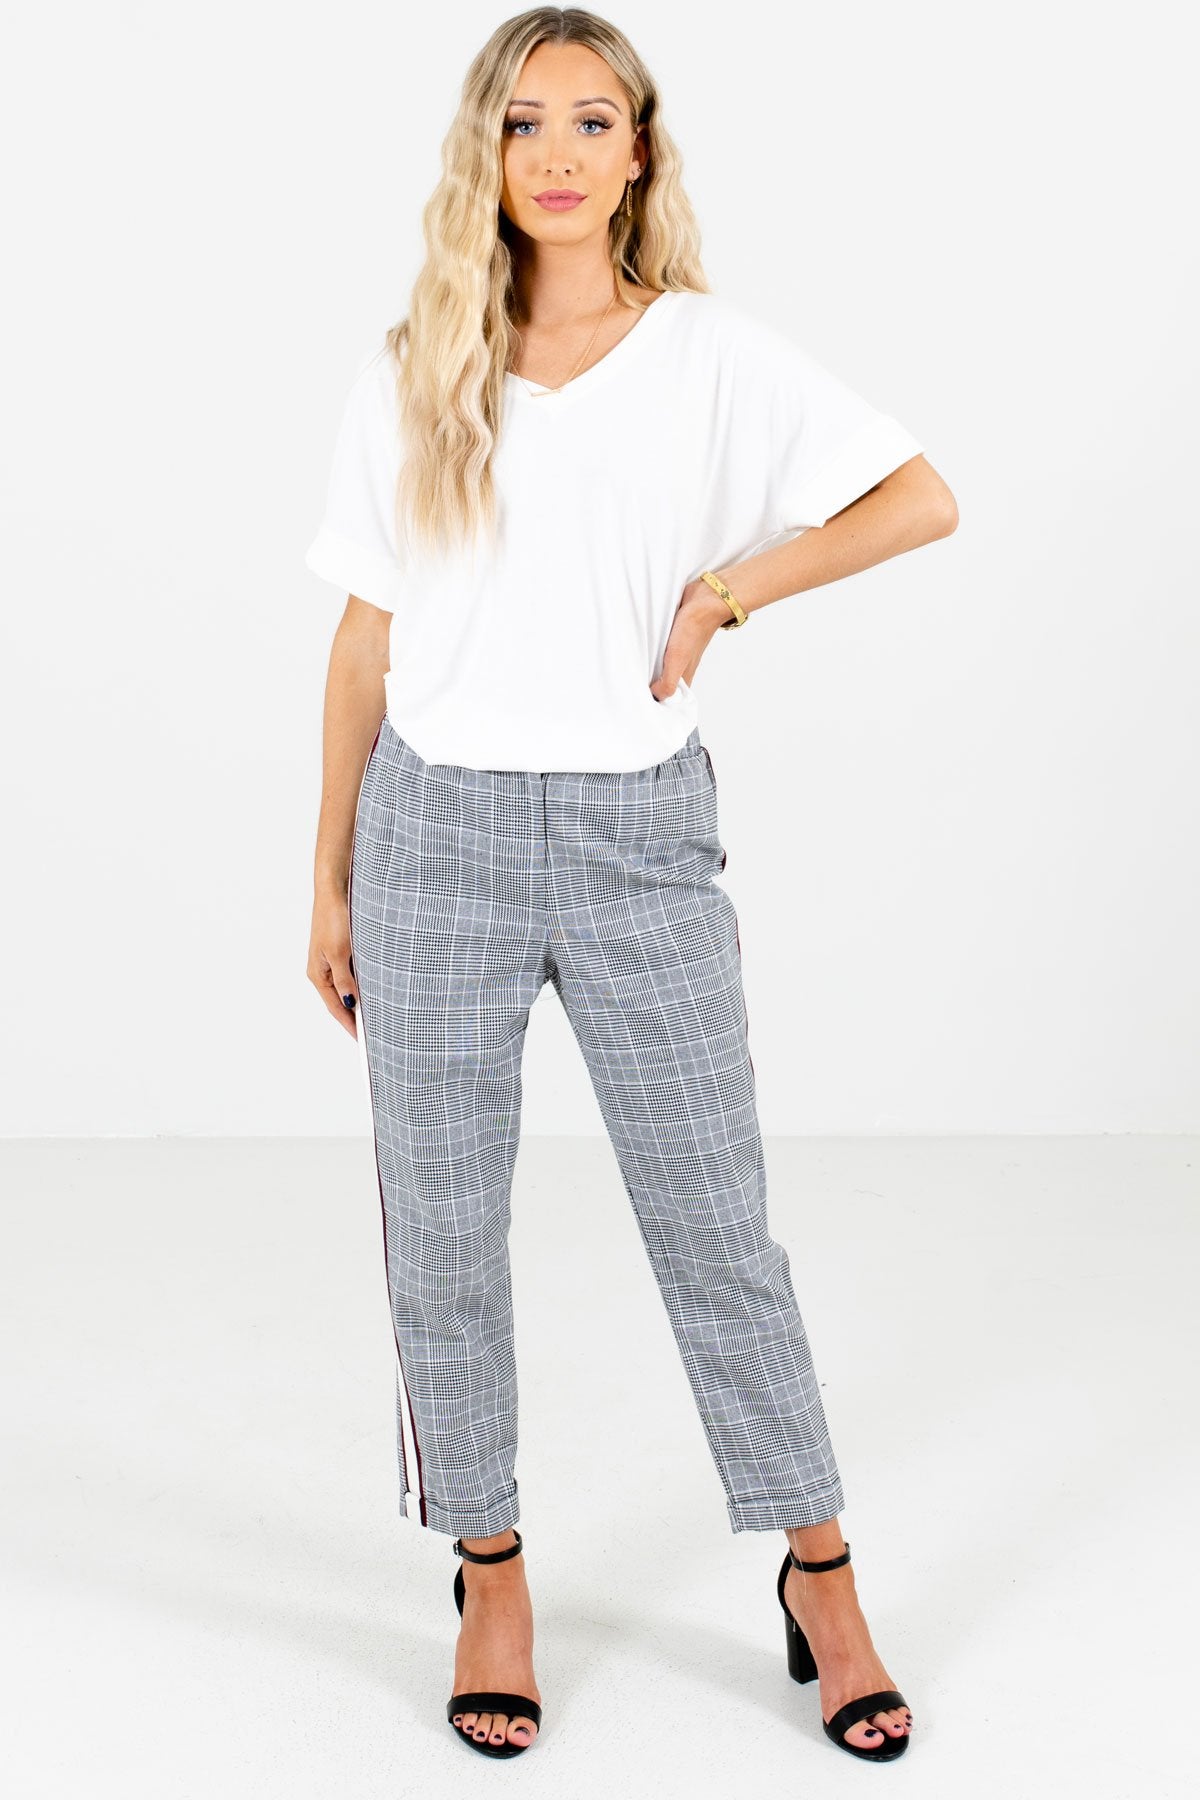 Check With Belll Bottom Multicolor Women Checked Trousers, Waist Size:  28-40 at Rs 175/piece in New Delhi